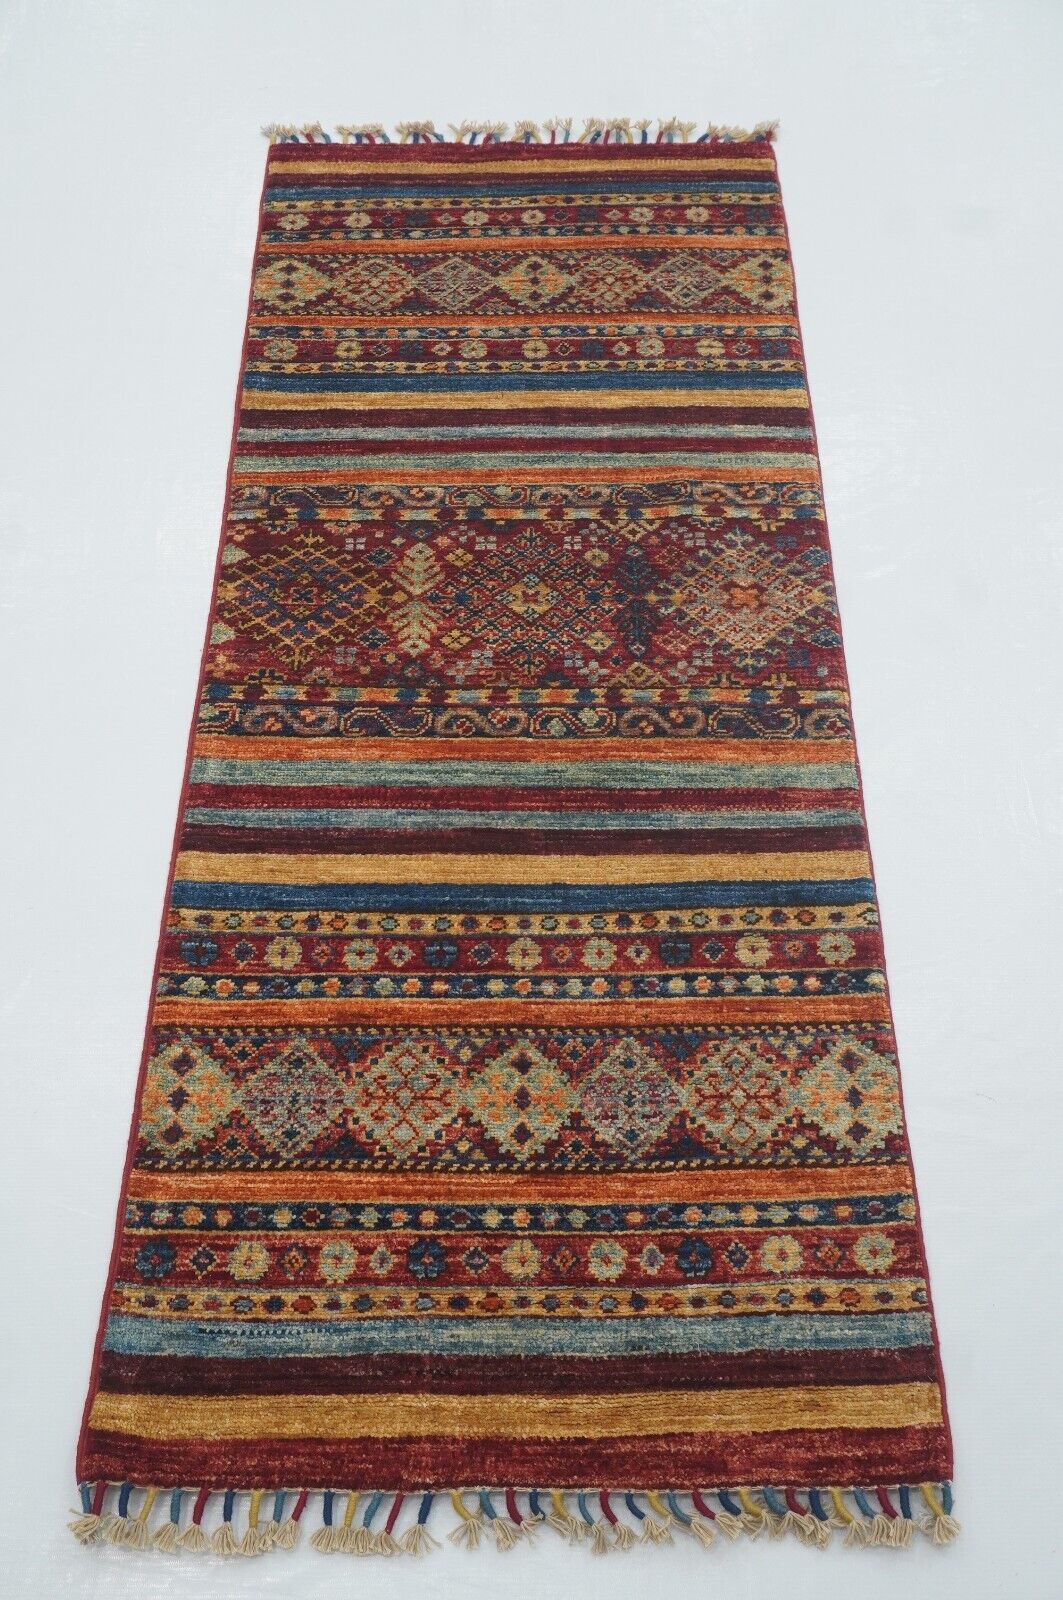 2 x 6 ft Red Striped Tribal Afghan Hand knotted Narrow Short Runner Rug